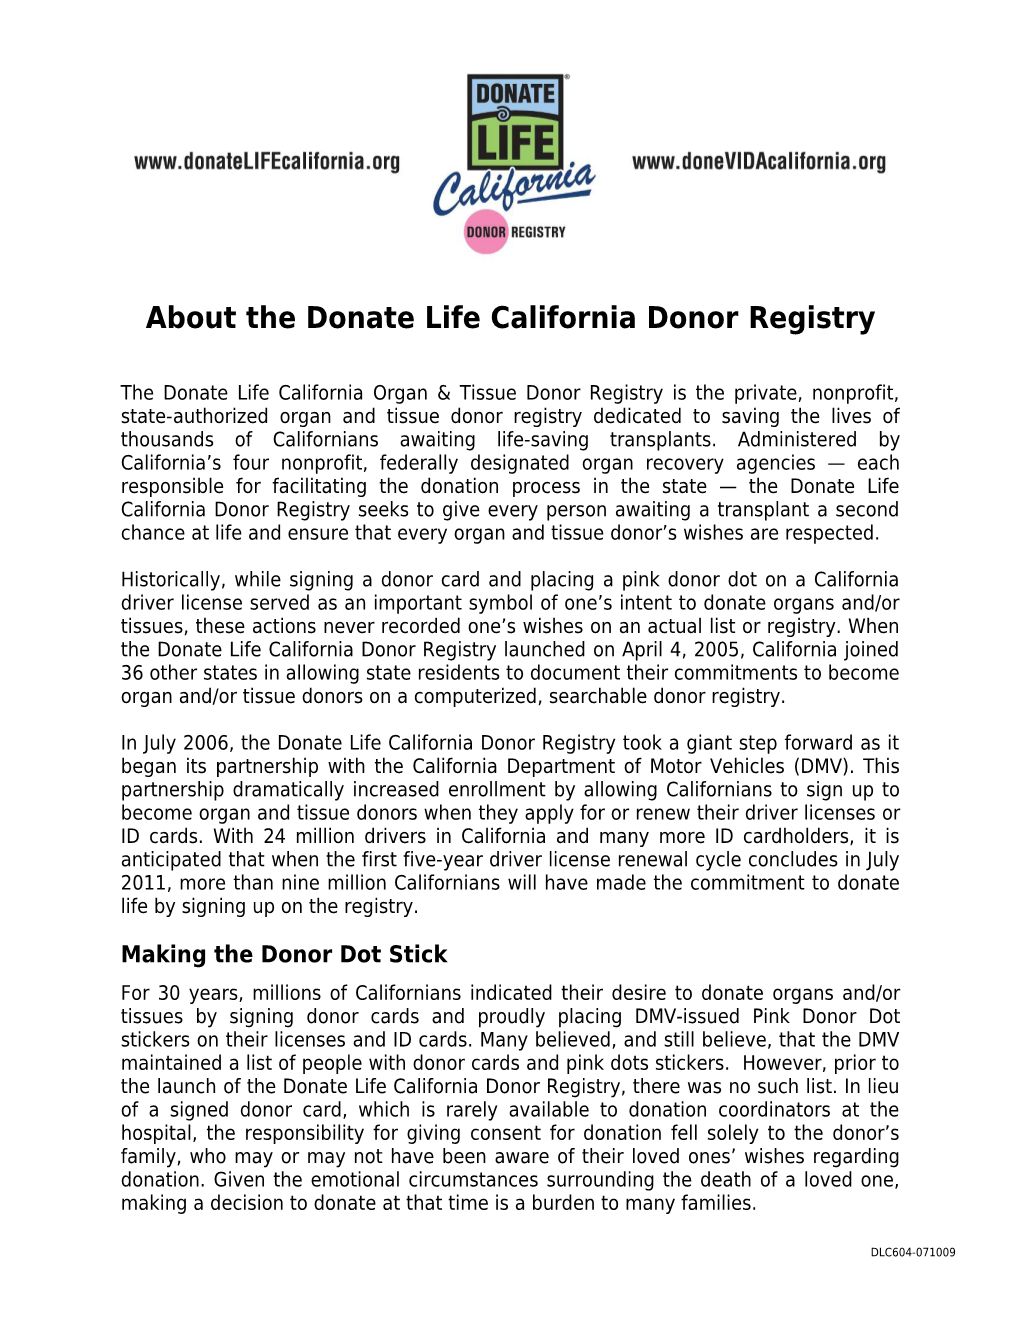 About the Donate Life California Donor Registry(Cont D)